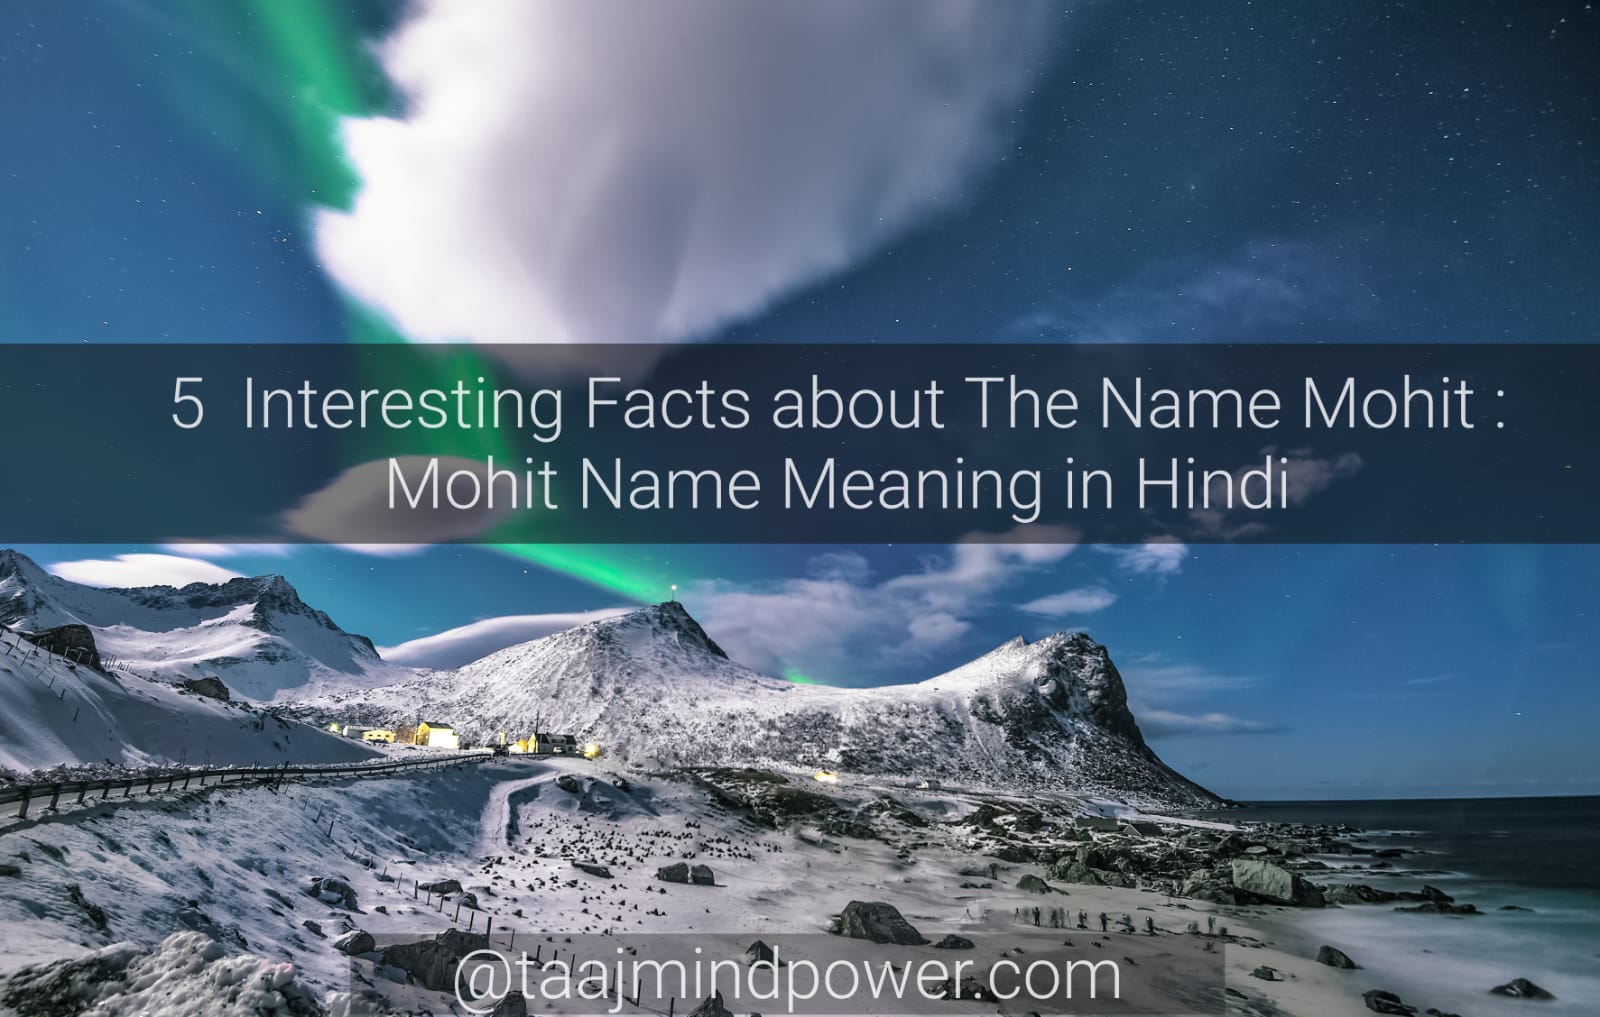 Mohit Name Meaning in Hindi